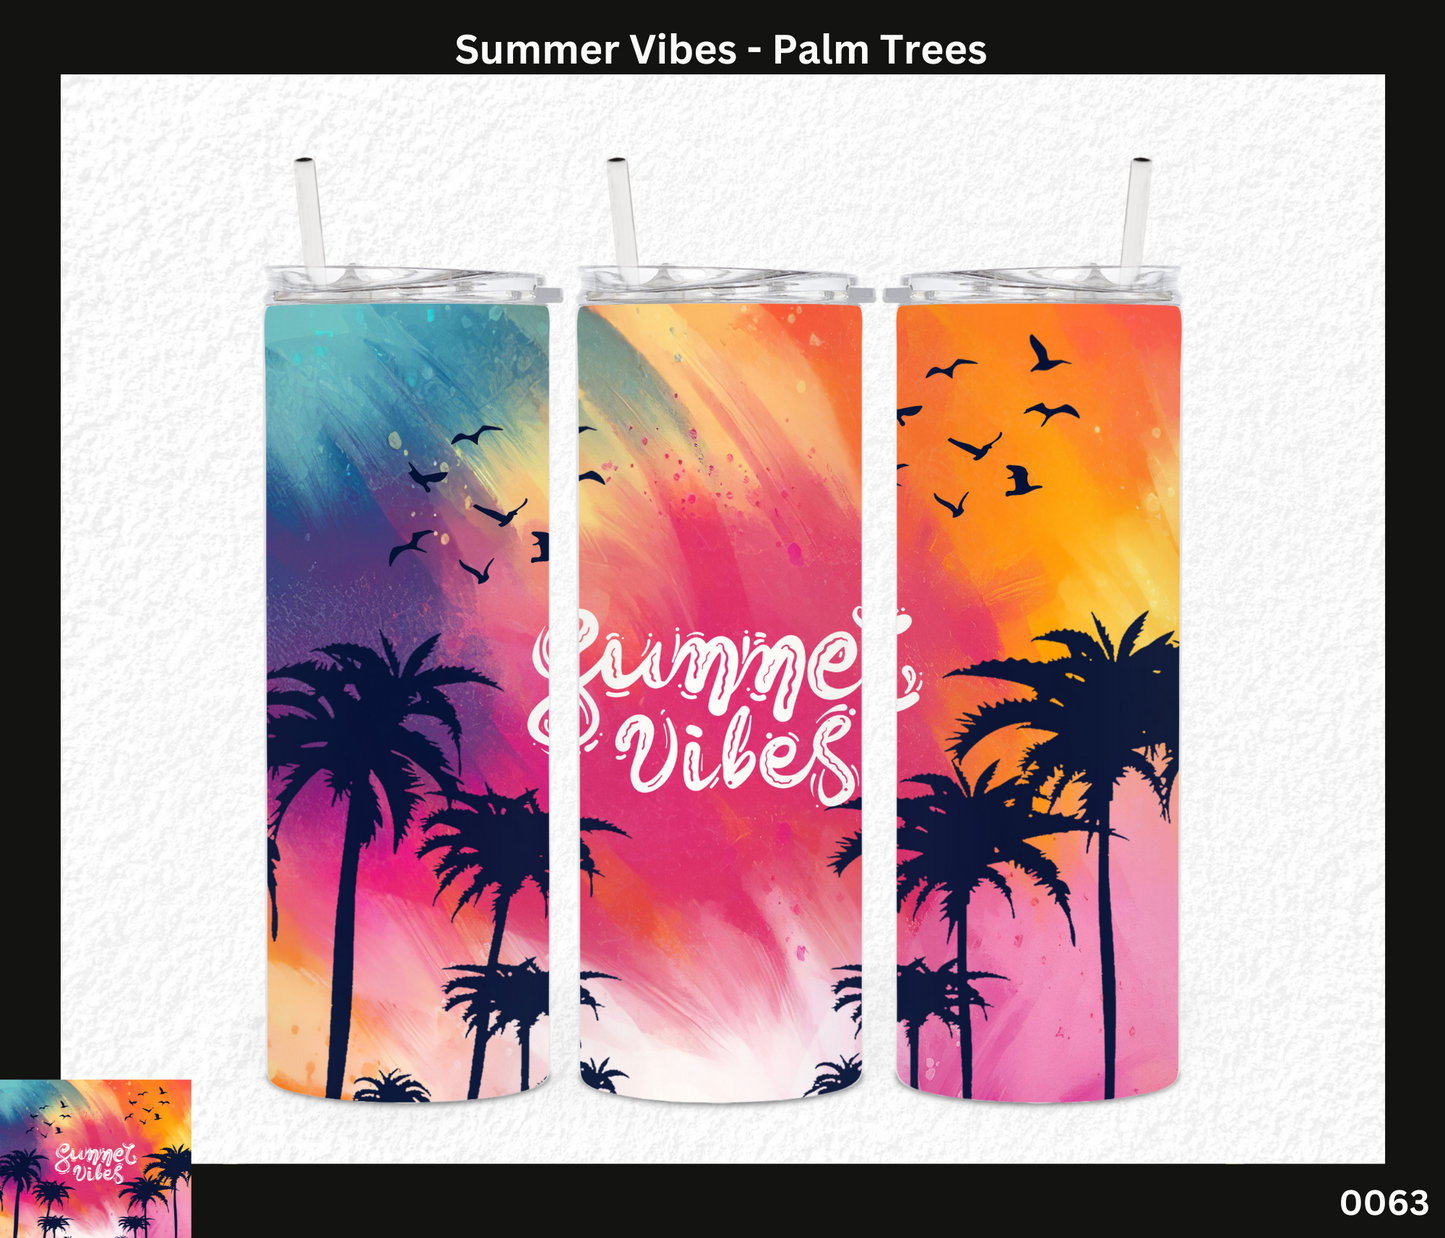 Summer Vibes - Palm Trees